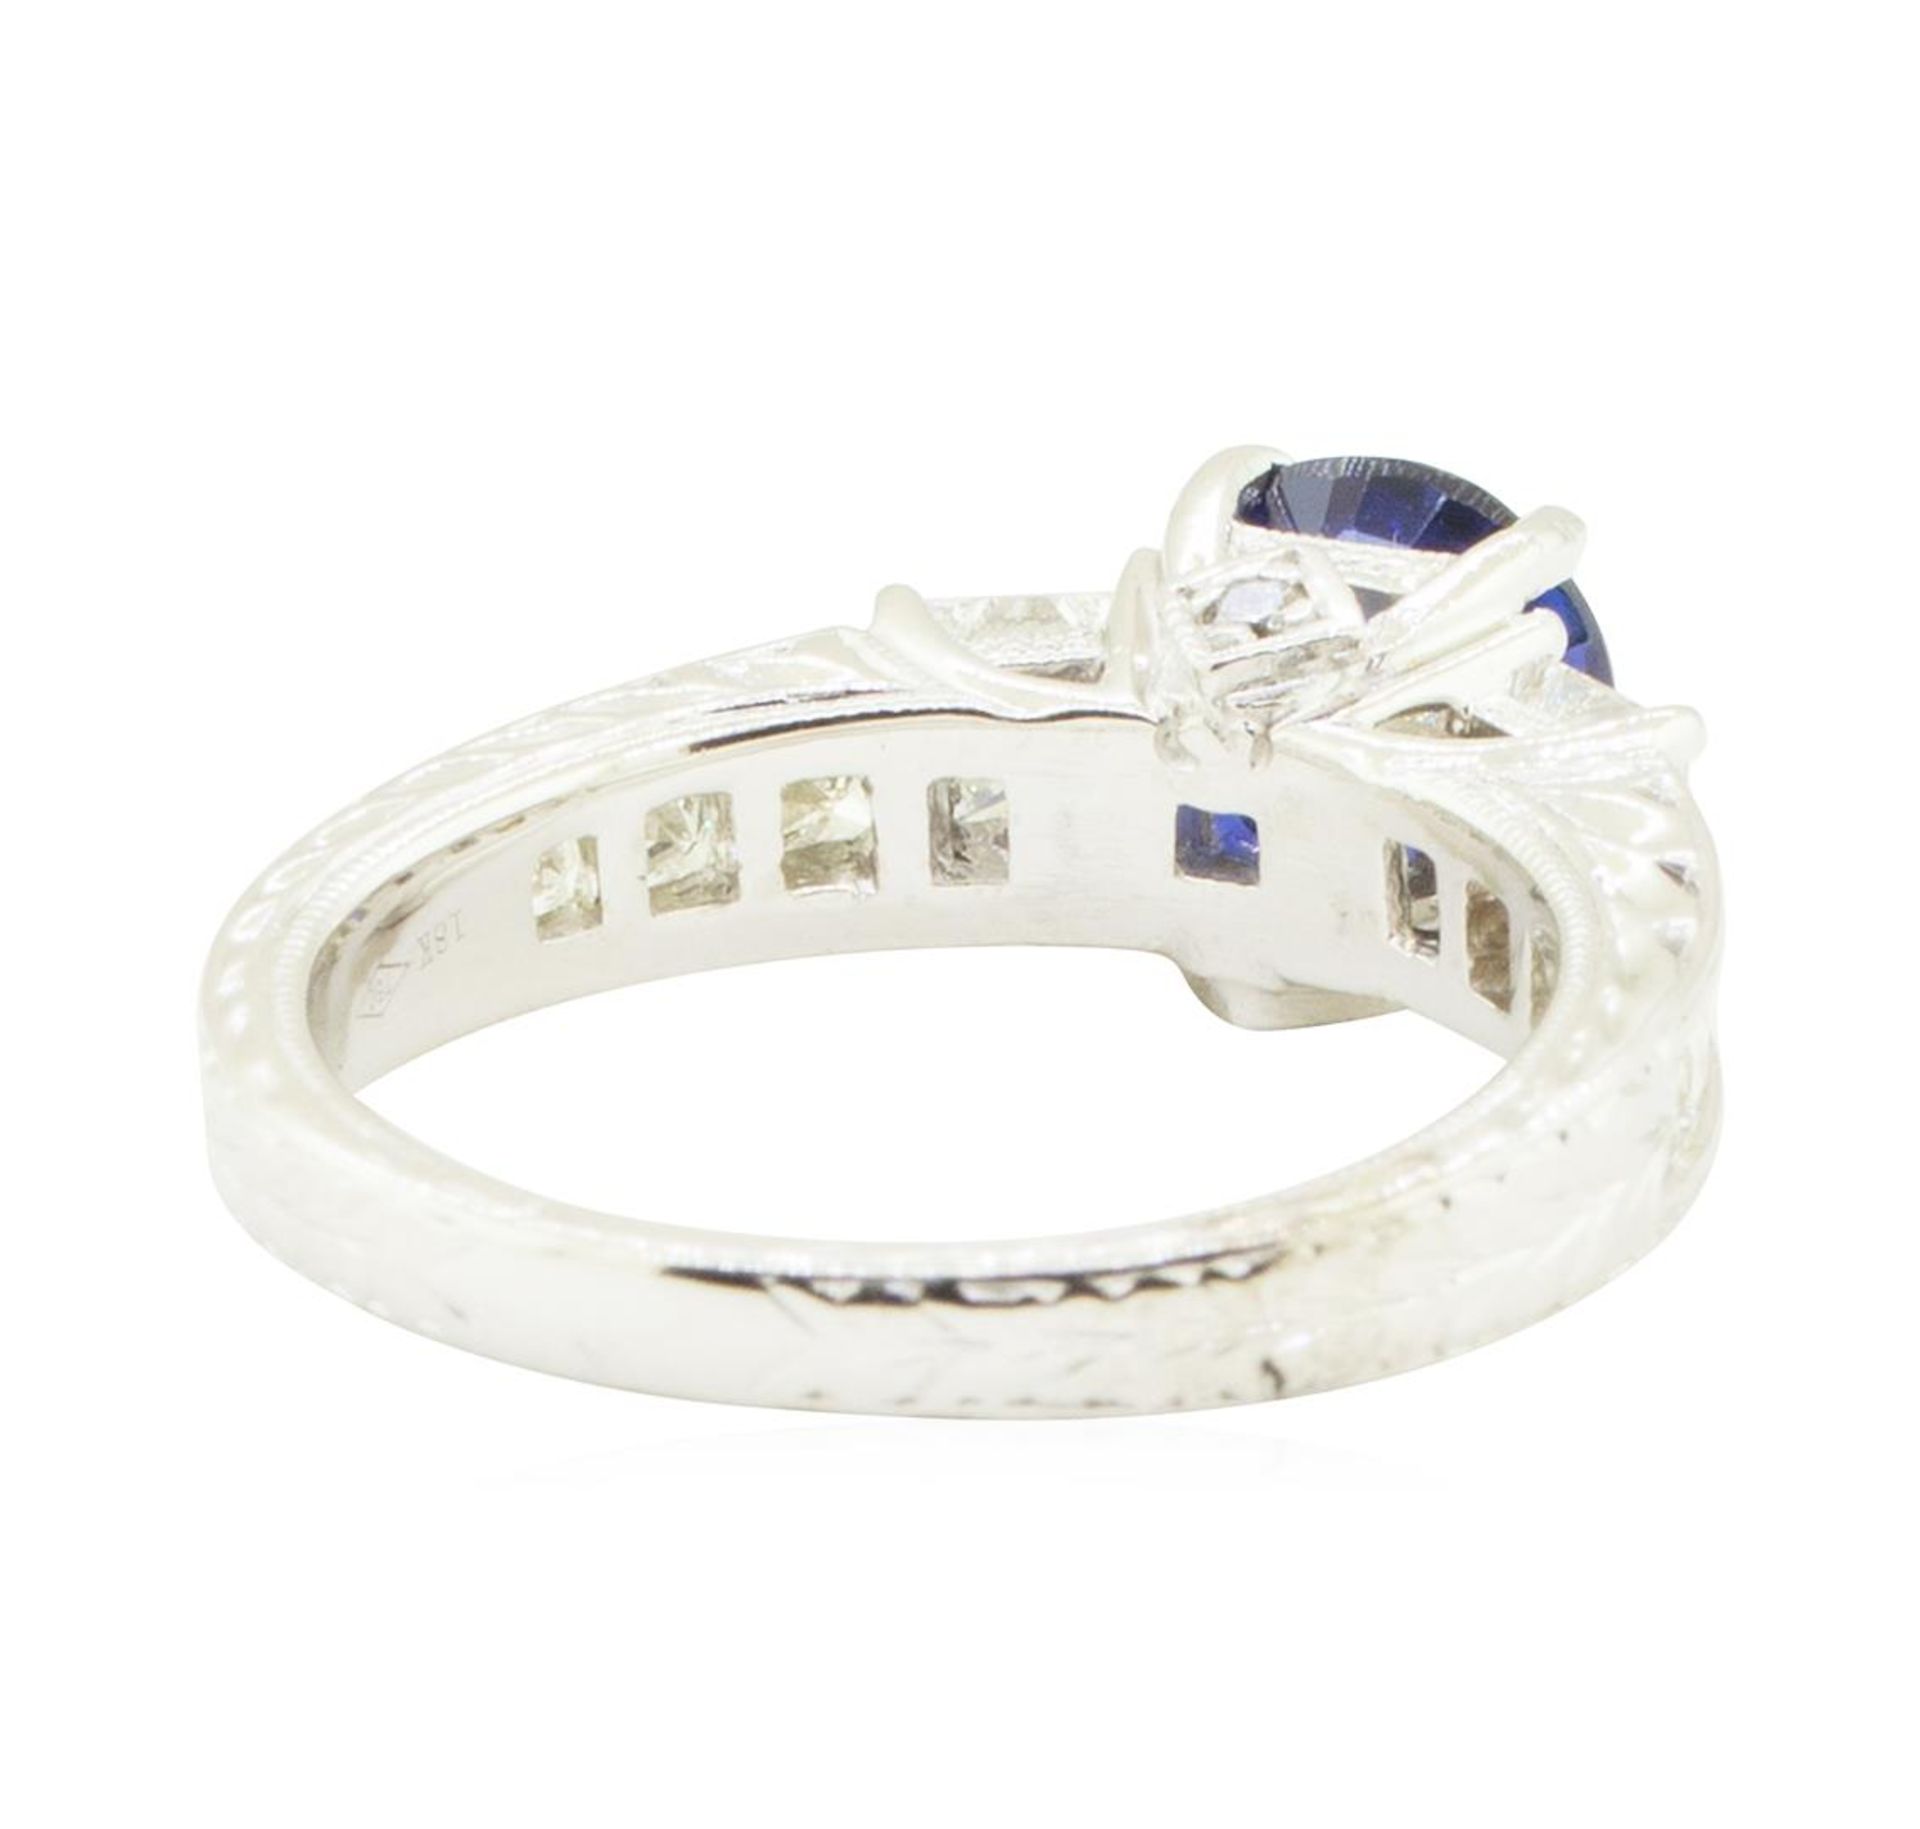 2.38 ctw Round Brilliant Blue Sapphire And Diamond Ring - 18KT White Gold - Image 3 of 5